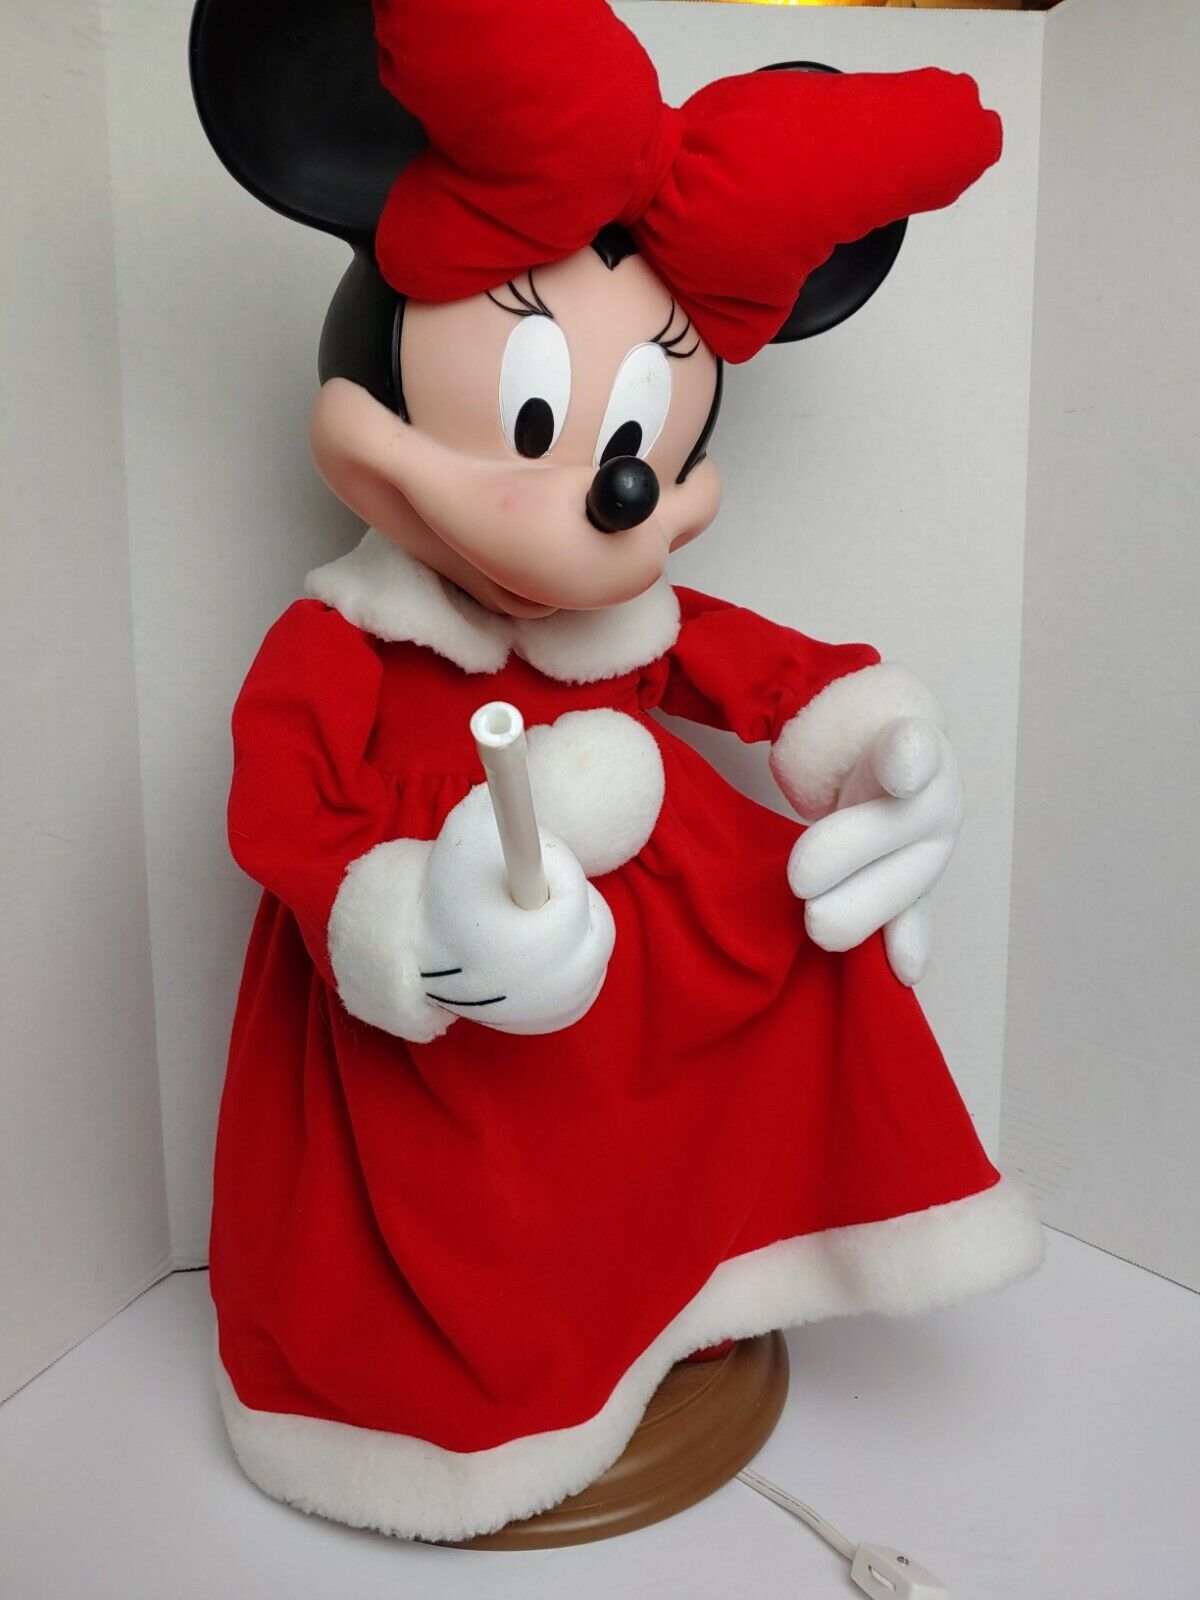 1996 Santas Best Minnie Mouse Holiday Animation Christmas Doll - Works